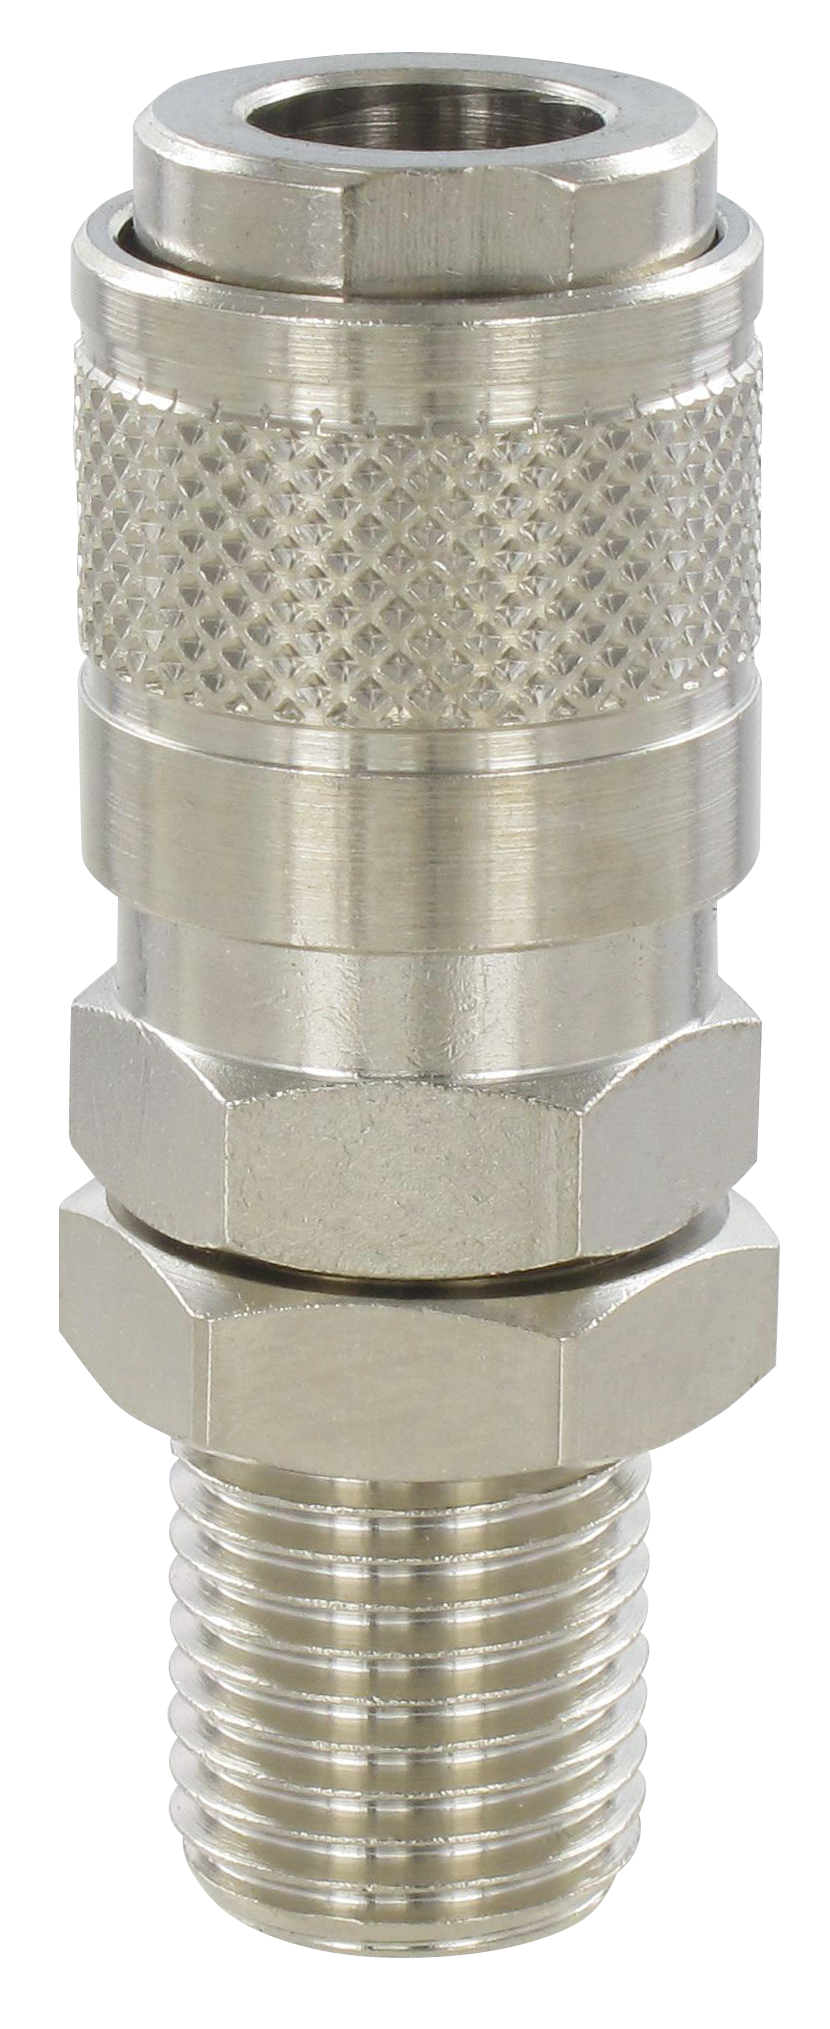 Quick-connect couplings, US-MIL standard ISO 6150 B-12 SOCKET WITH HOSE CONNECTION